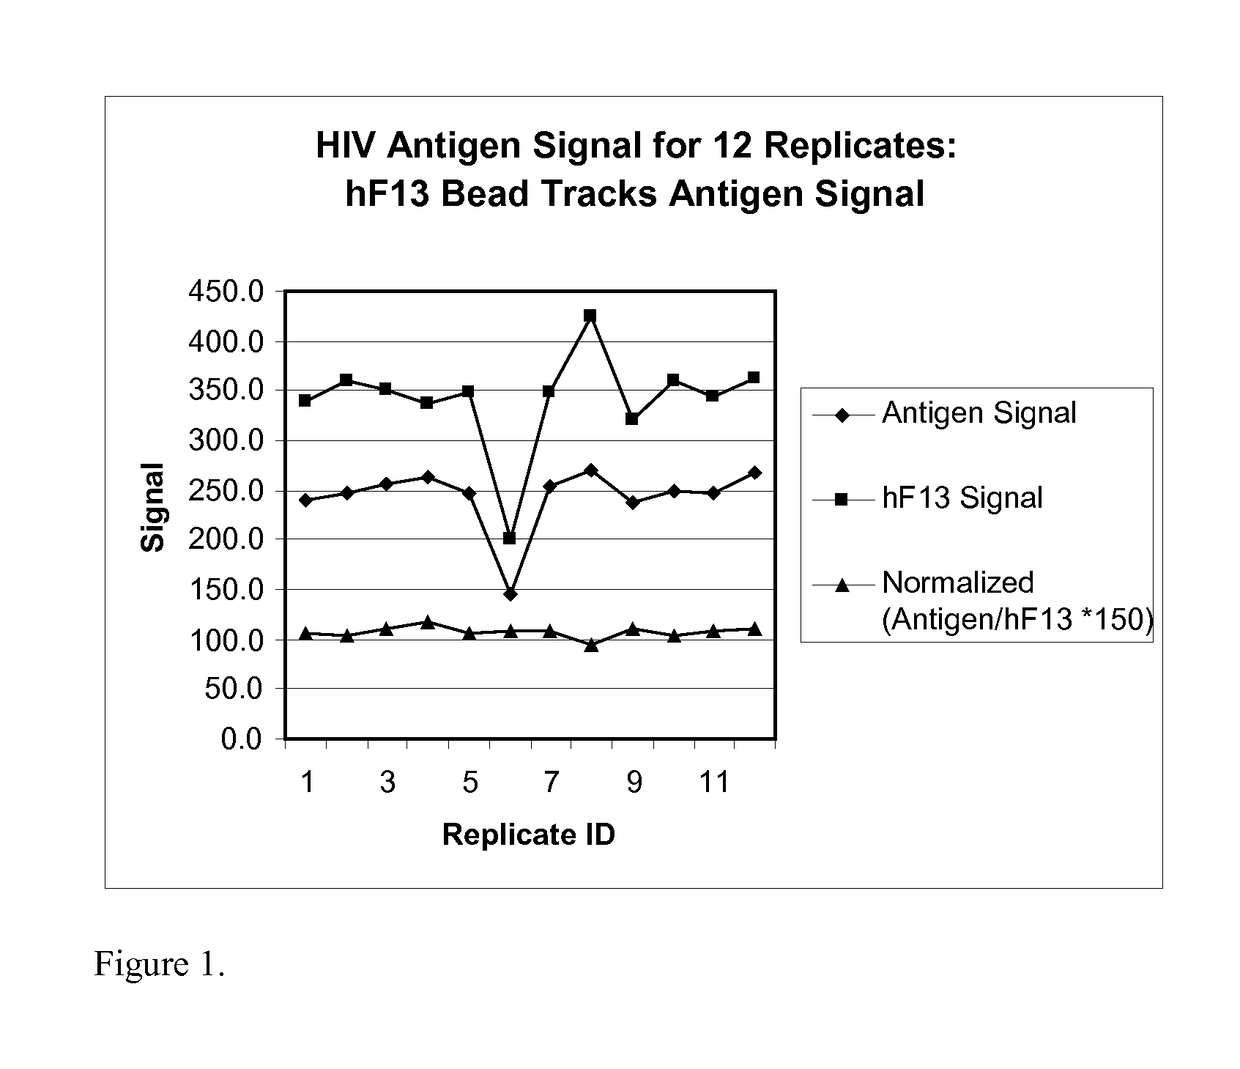 Human factor XIII as a normalization control for immunoassays